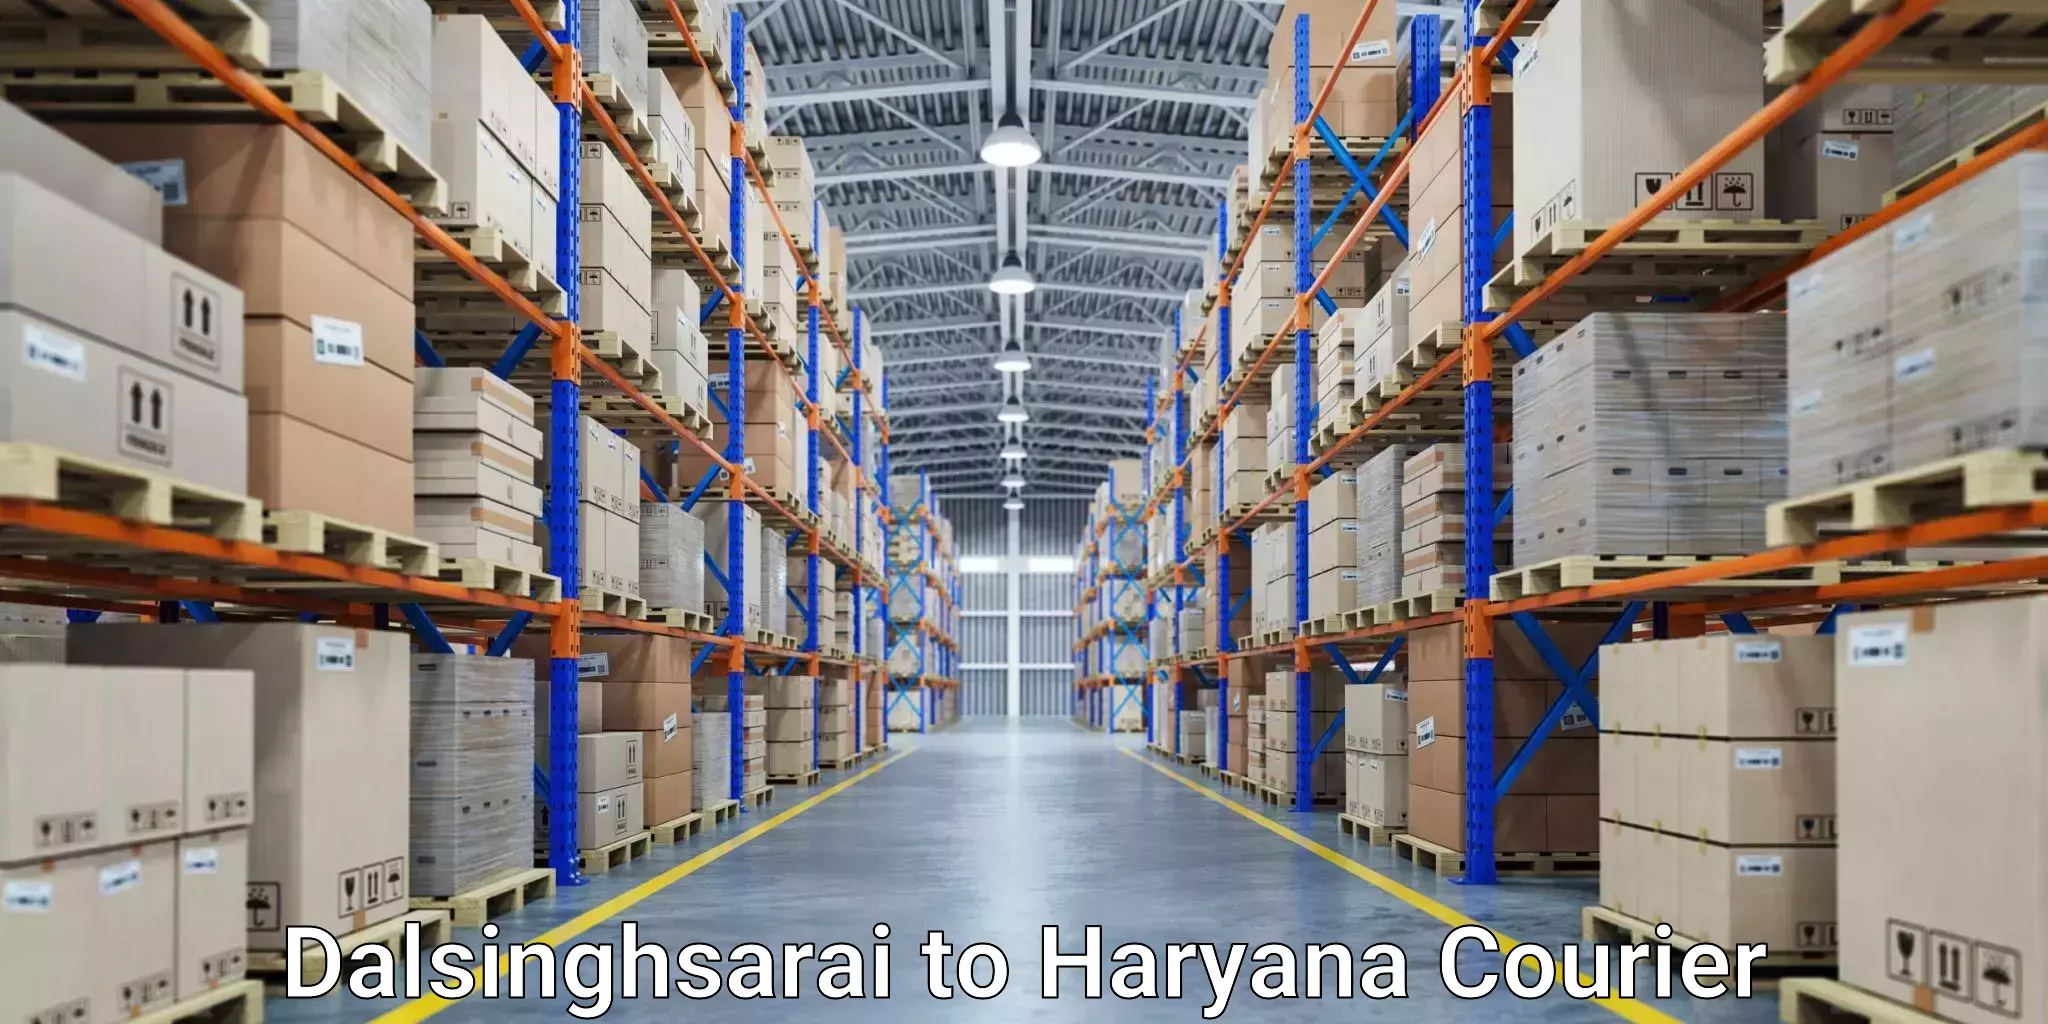 Cargo delivery service Dalsinghsarai to Chaudhary Charan Singh Haryana Agricultural University Hisar